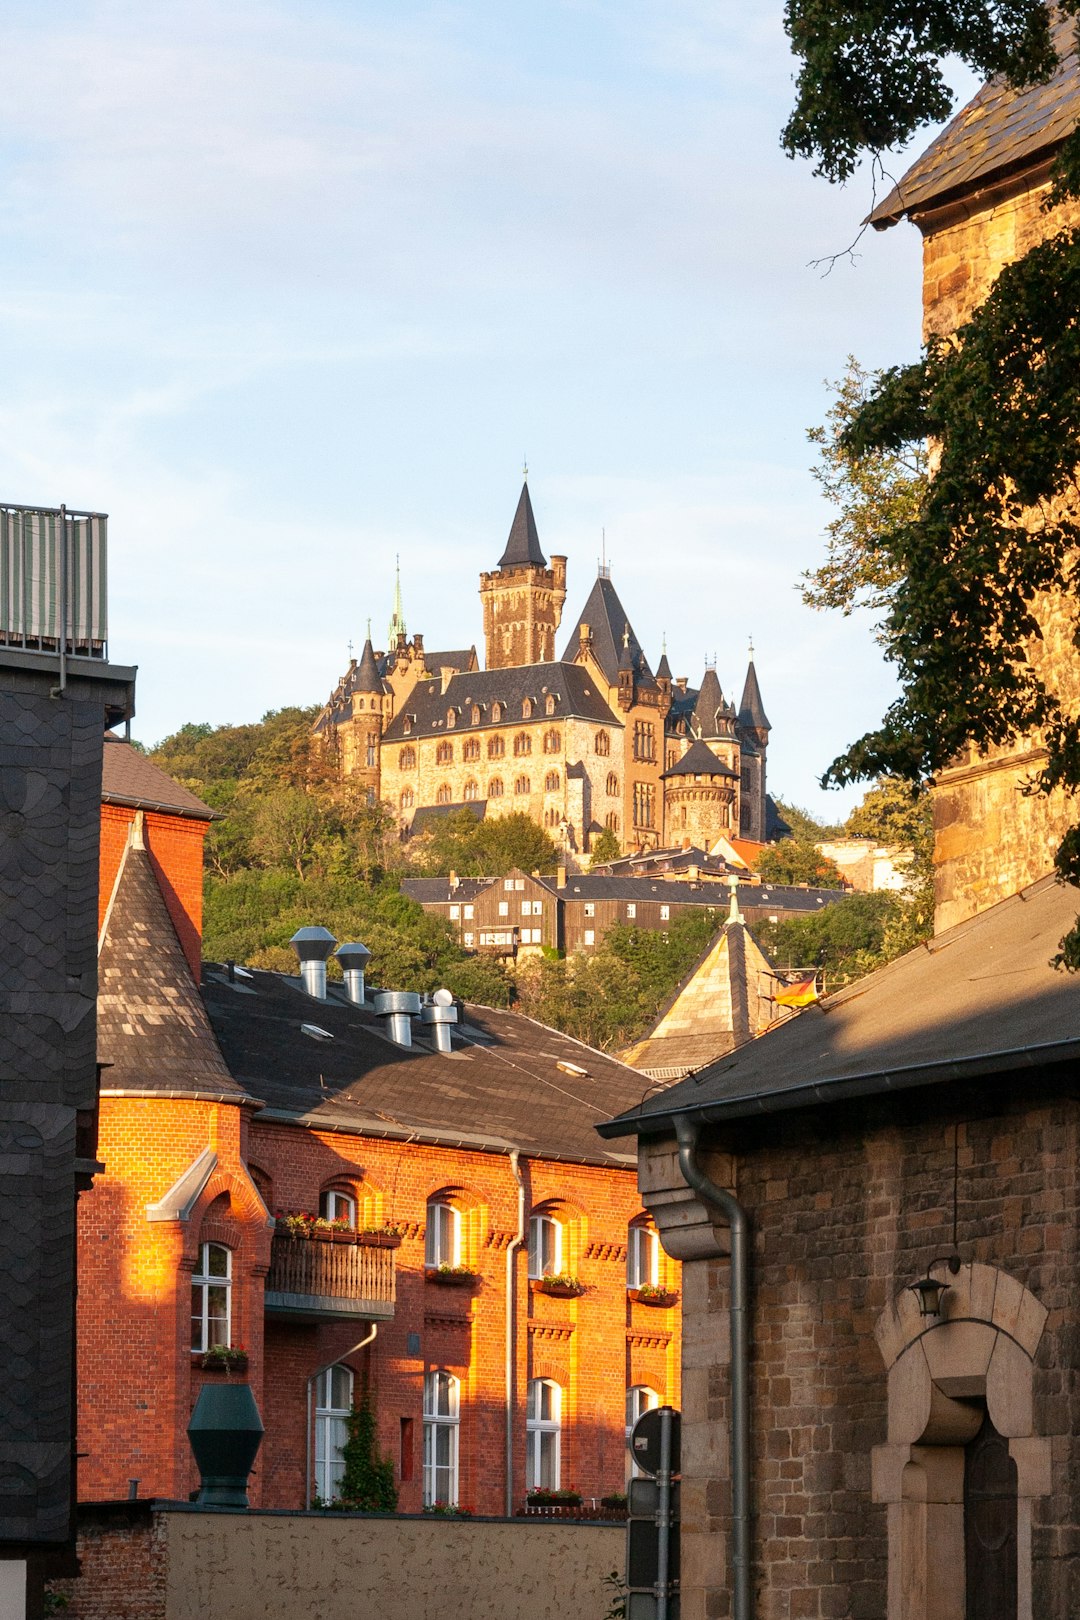 Travel Tips and Stories of Schloss Wernigerode in Germany